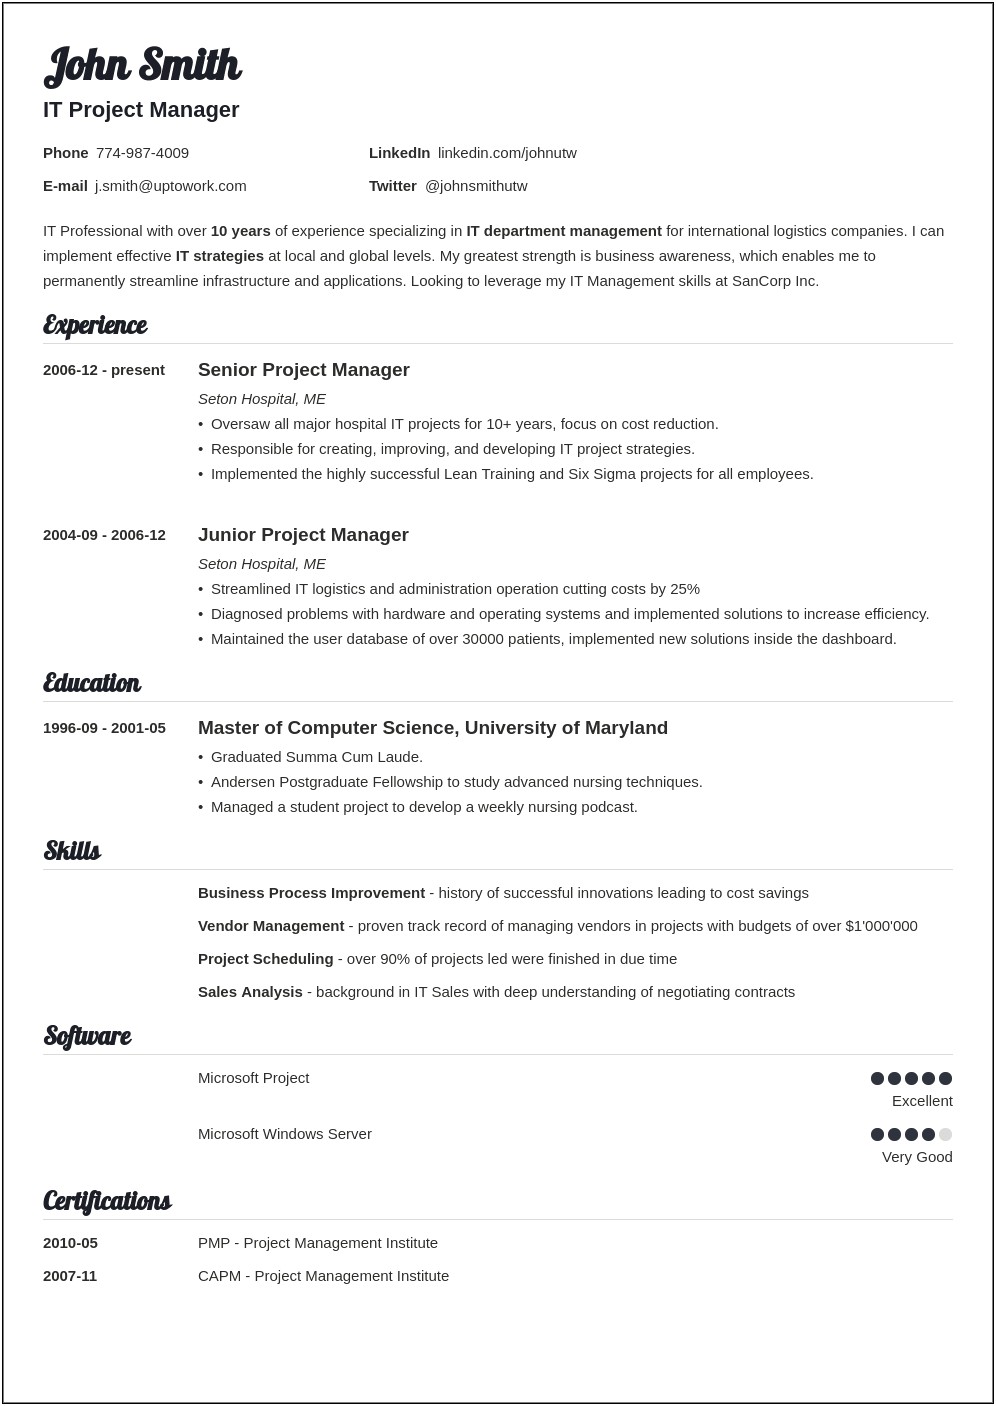 Microsoft 2010 Word Templates For Resume